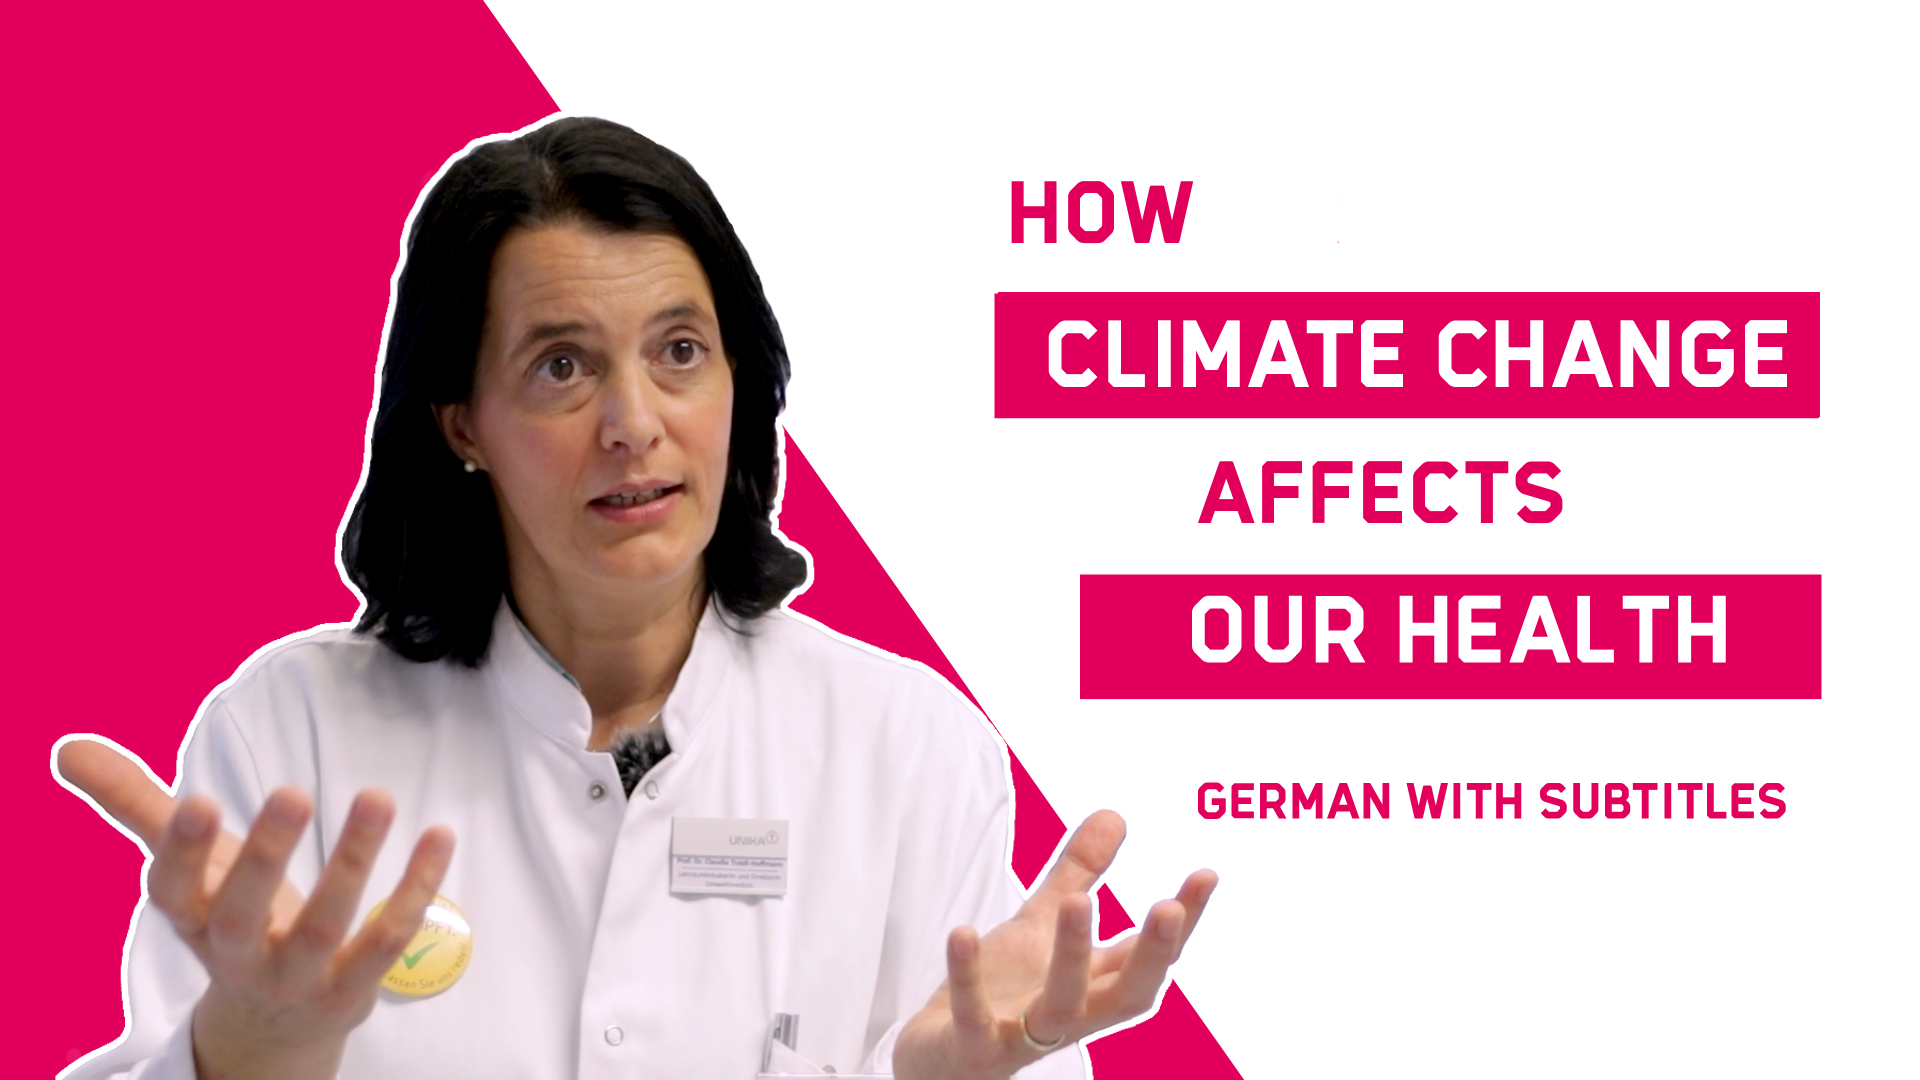 How does climate change affect our health? Claudia Traidl-Hoffmann from the Munich Institute for Environmental Medicine explains.